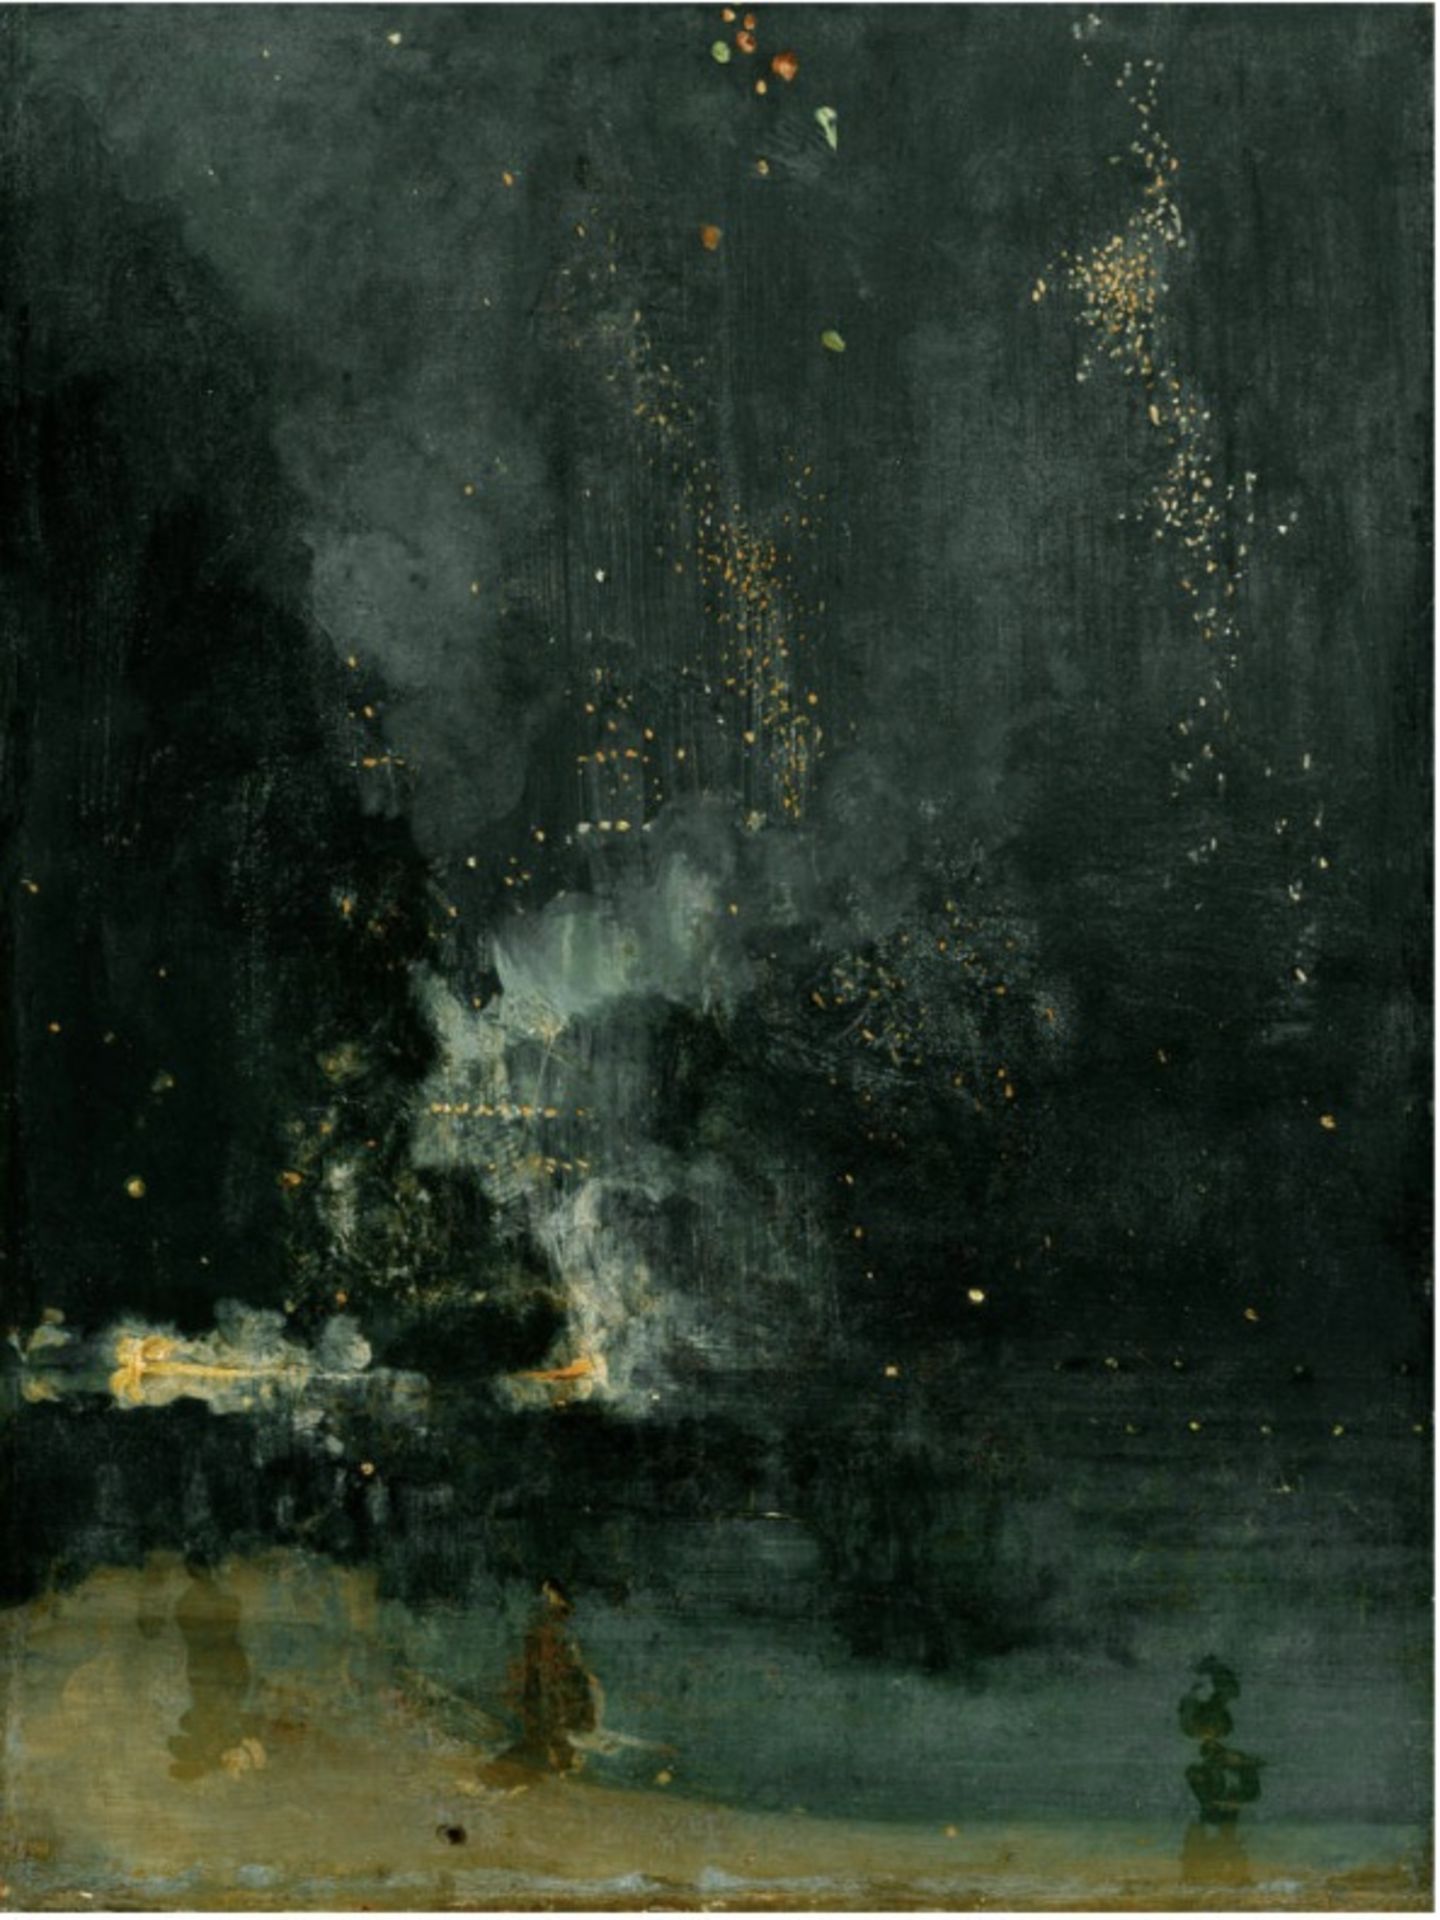 James Abbott McNeill Whistler "Nocturne in Black and Gold, The Falling Rocket, 1875" Print